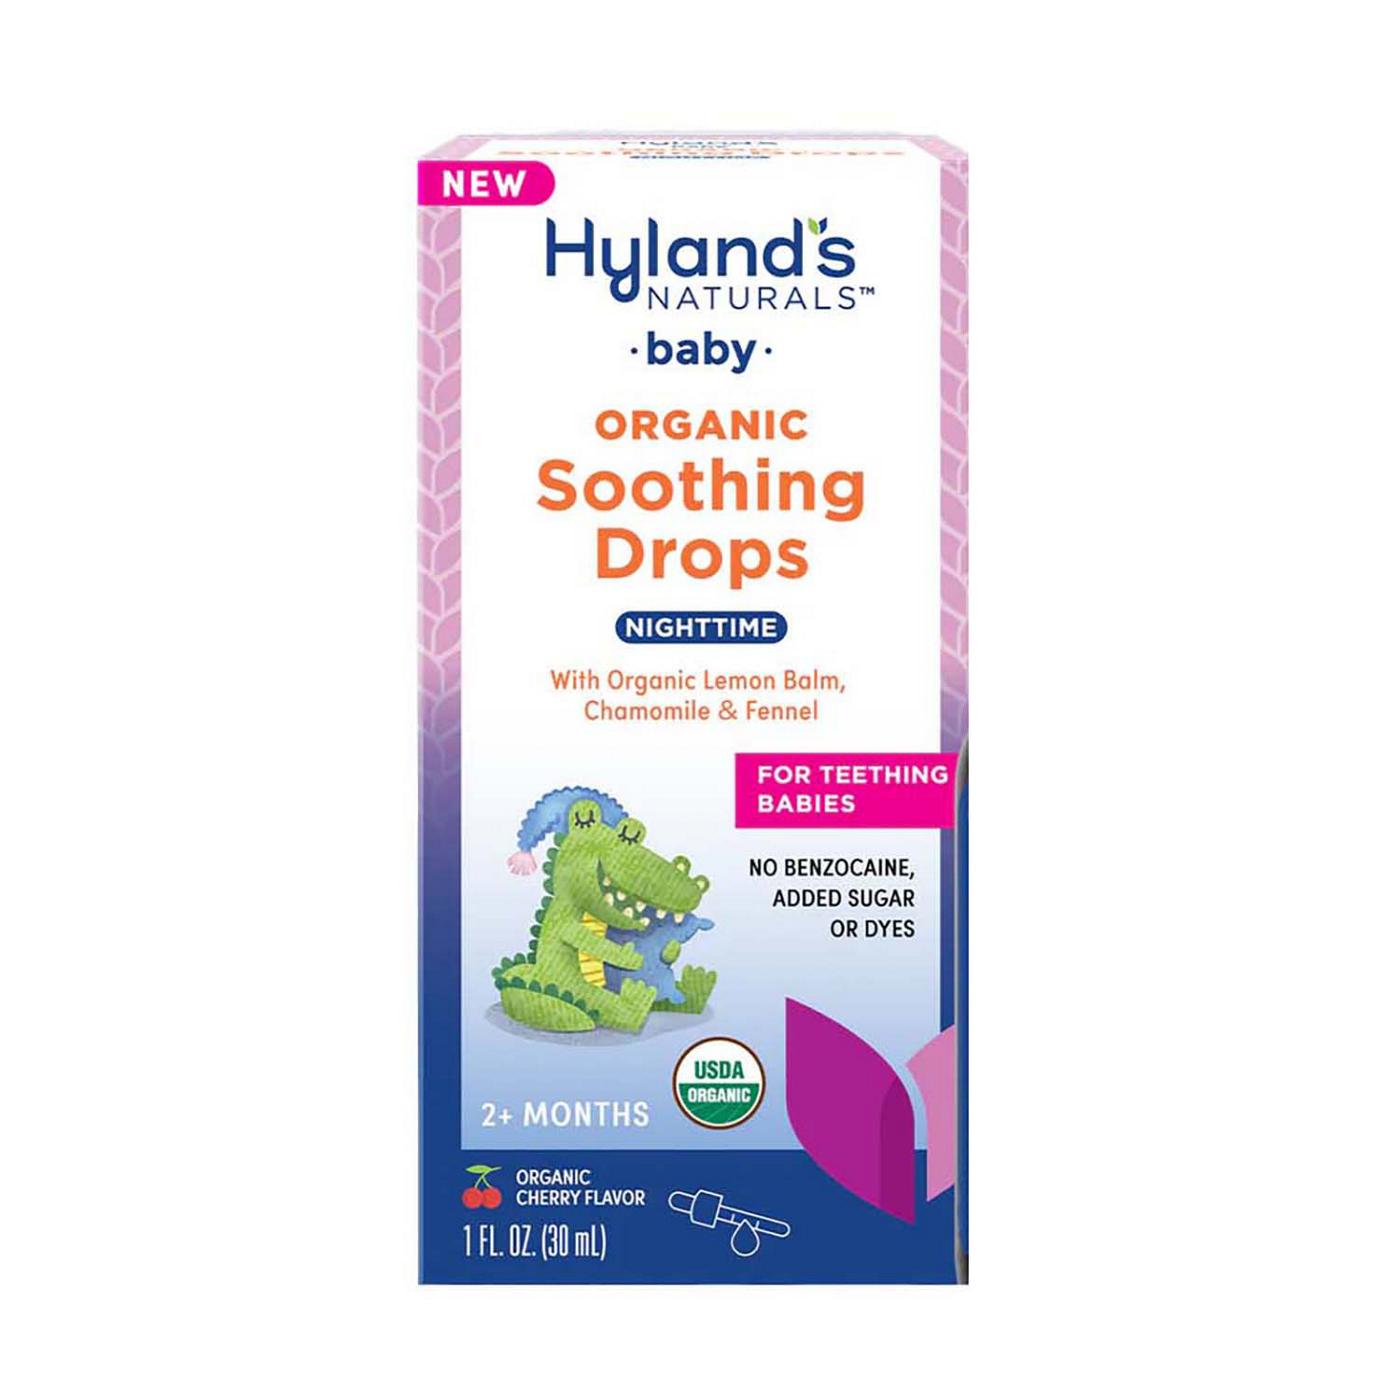 Hyland's Naturals Baby Organic Soothing Drops Nighttime - Cherry; image 1 of 3